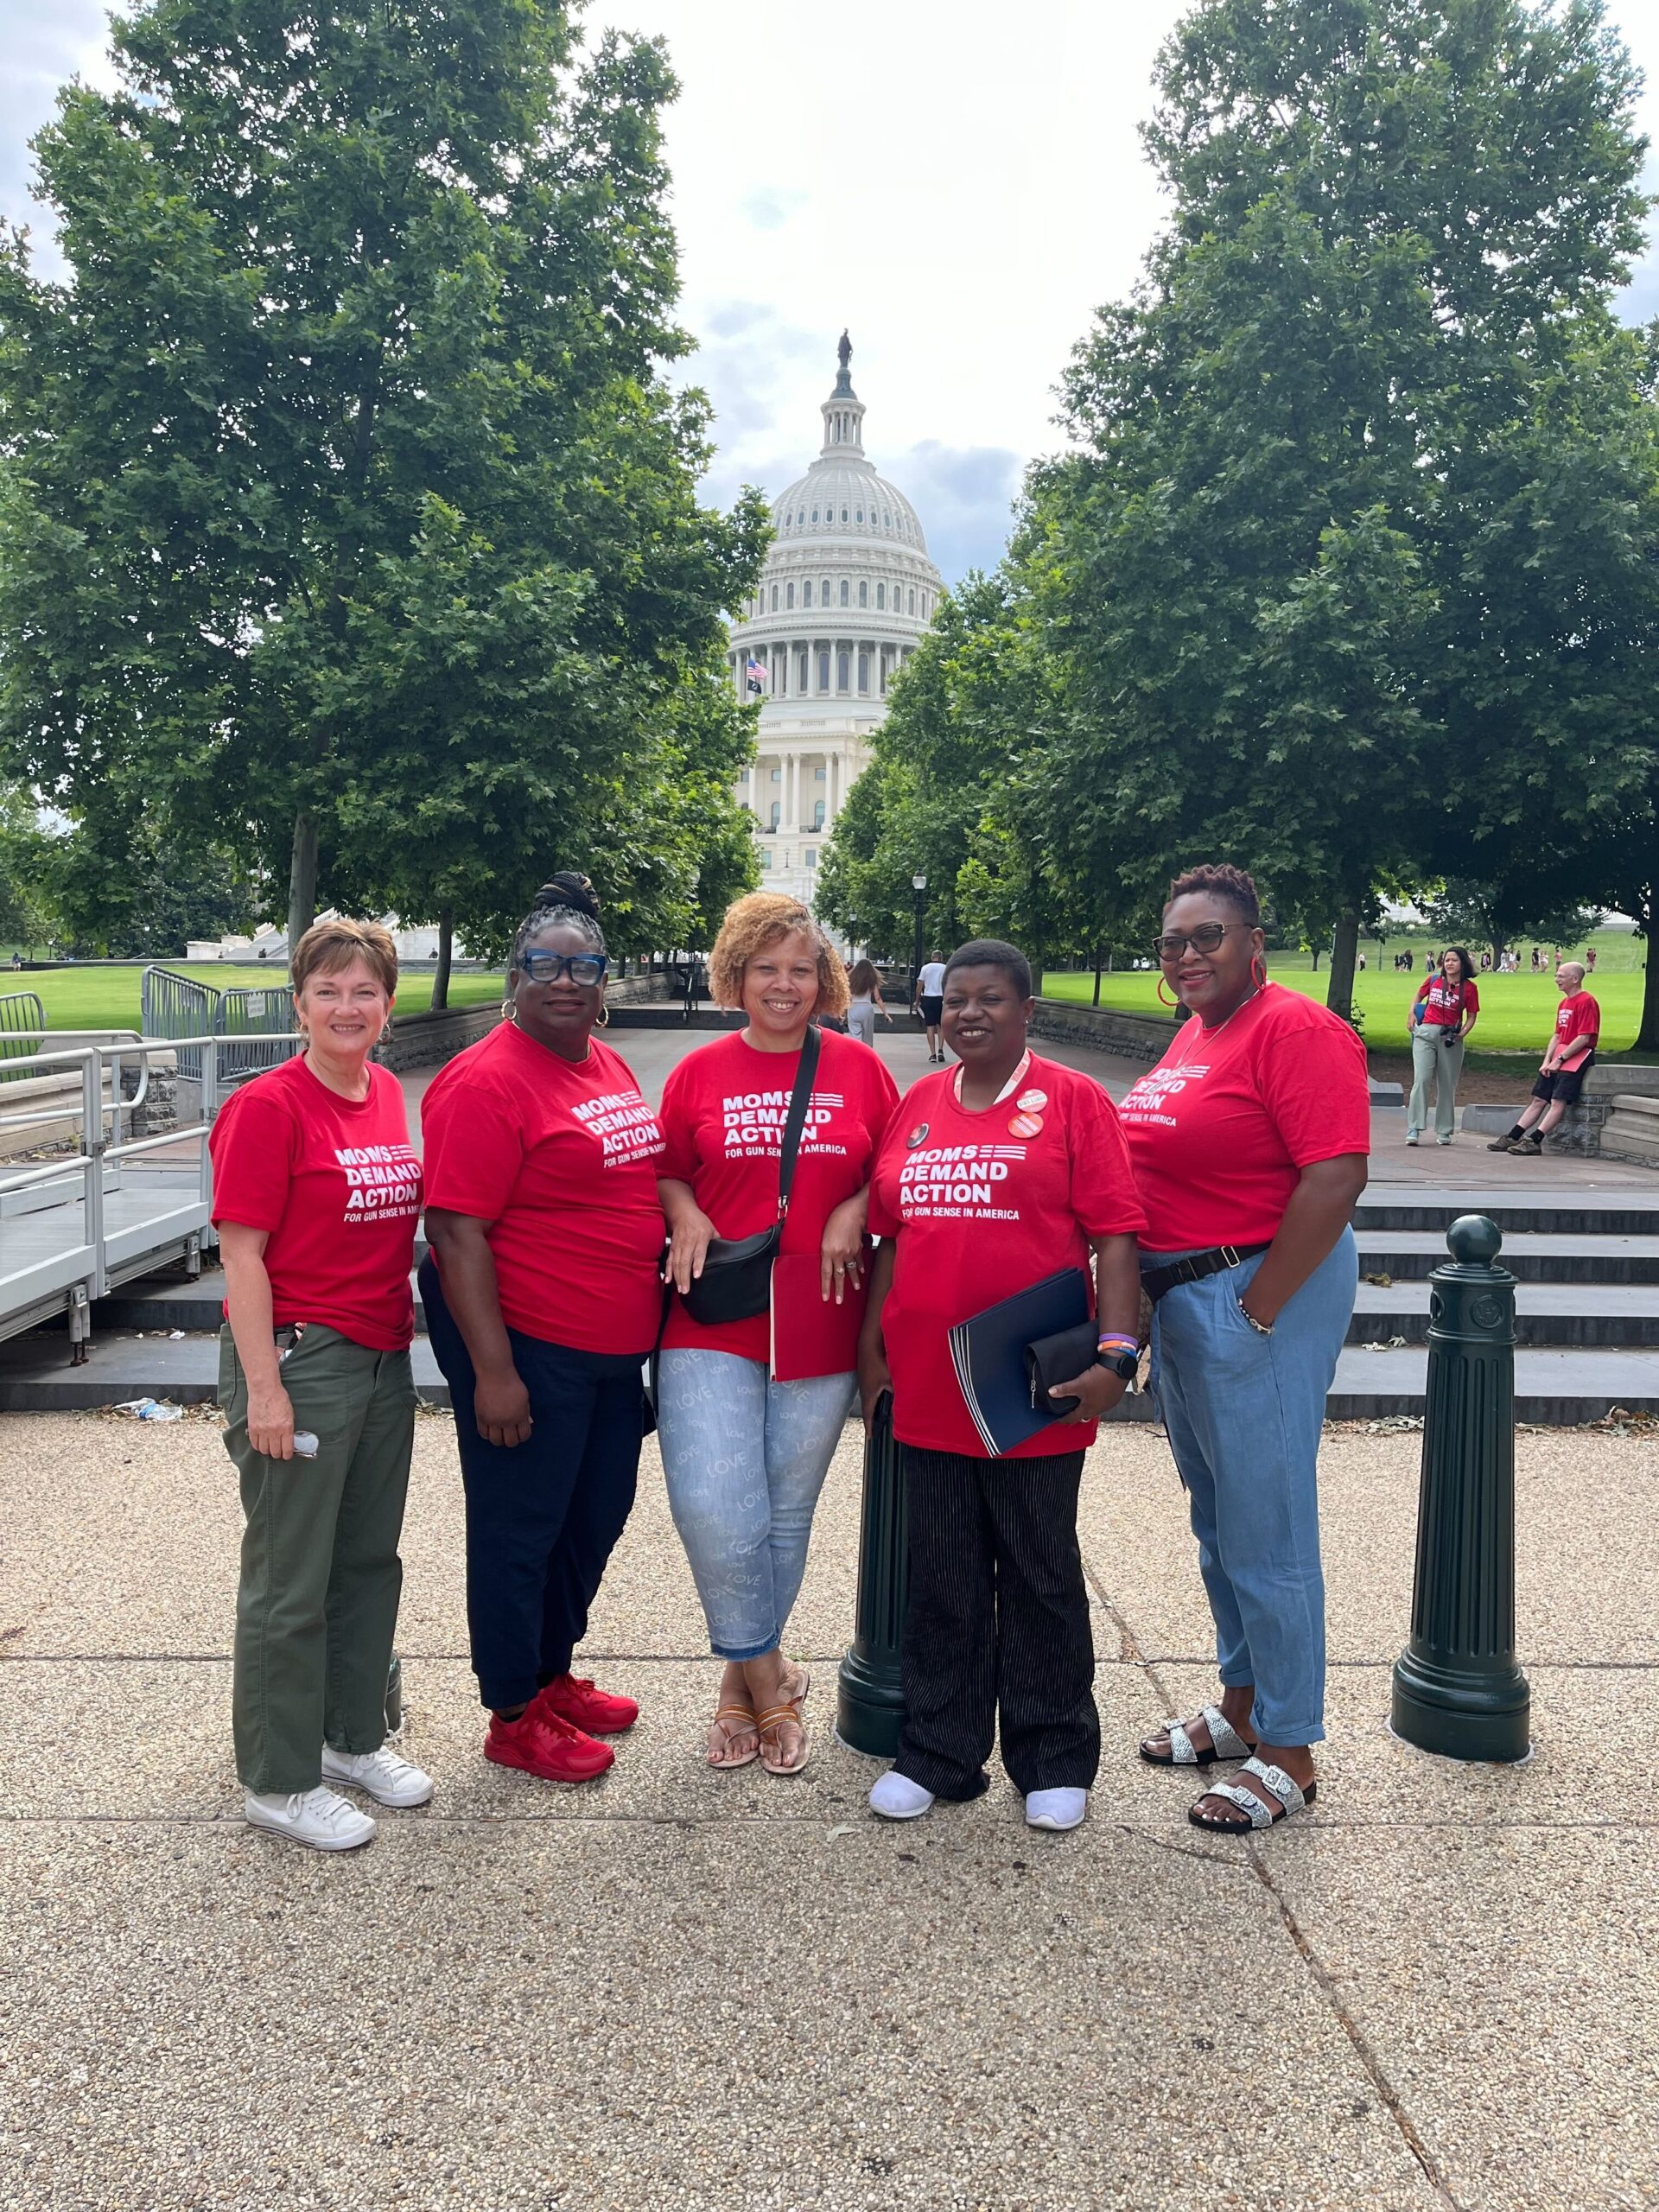 Five volunteers from Alabama pose for a photo in front of the Capitol Building. Shade trees line the path that extends directly behind them; the Capitol building is visible in the center back of the photo.